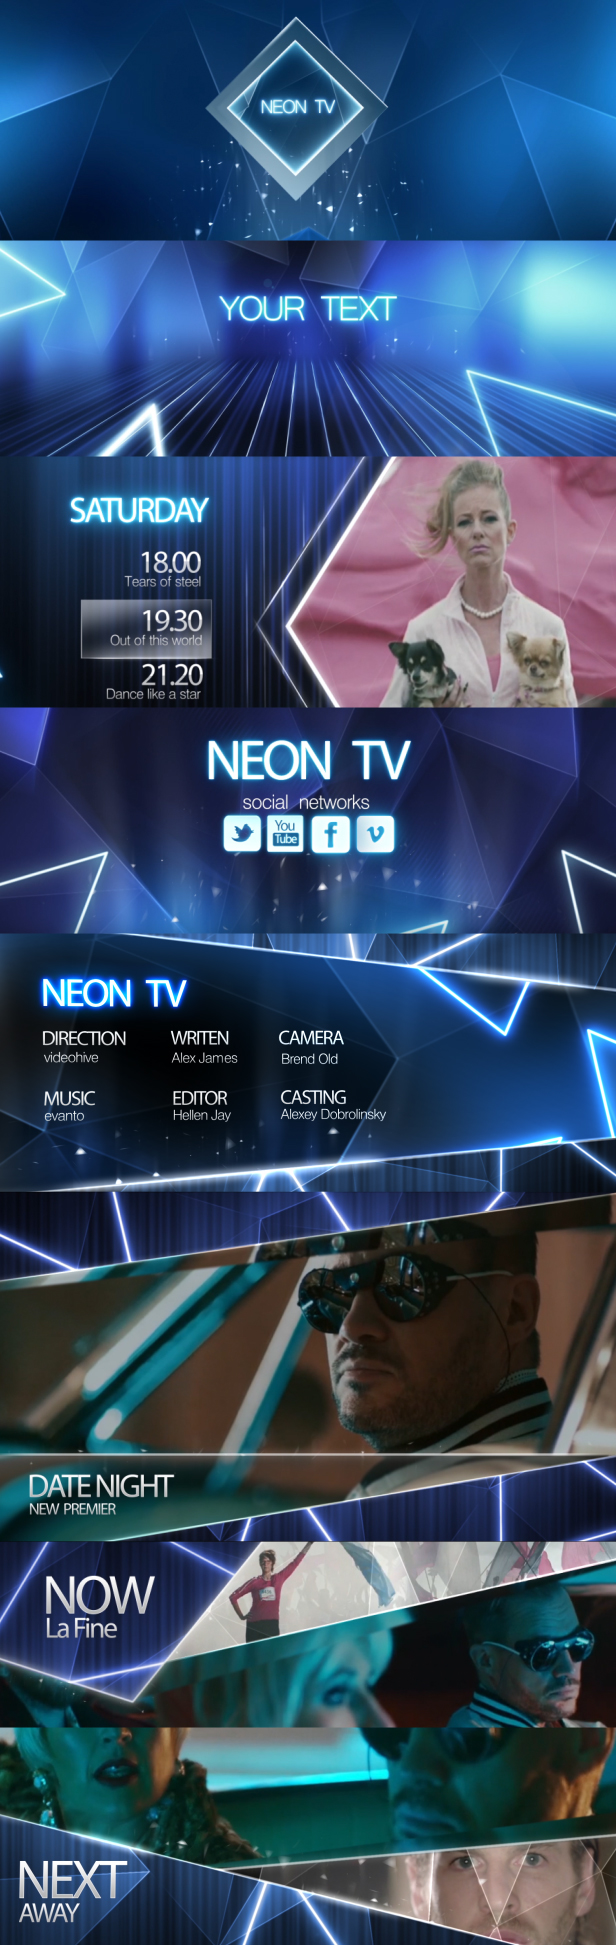 videohive glamour tv ID broadcast buauty neon glow flare particle elegant after effects design motion blue